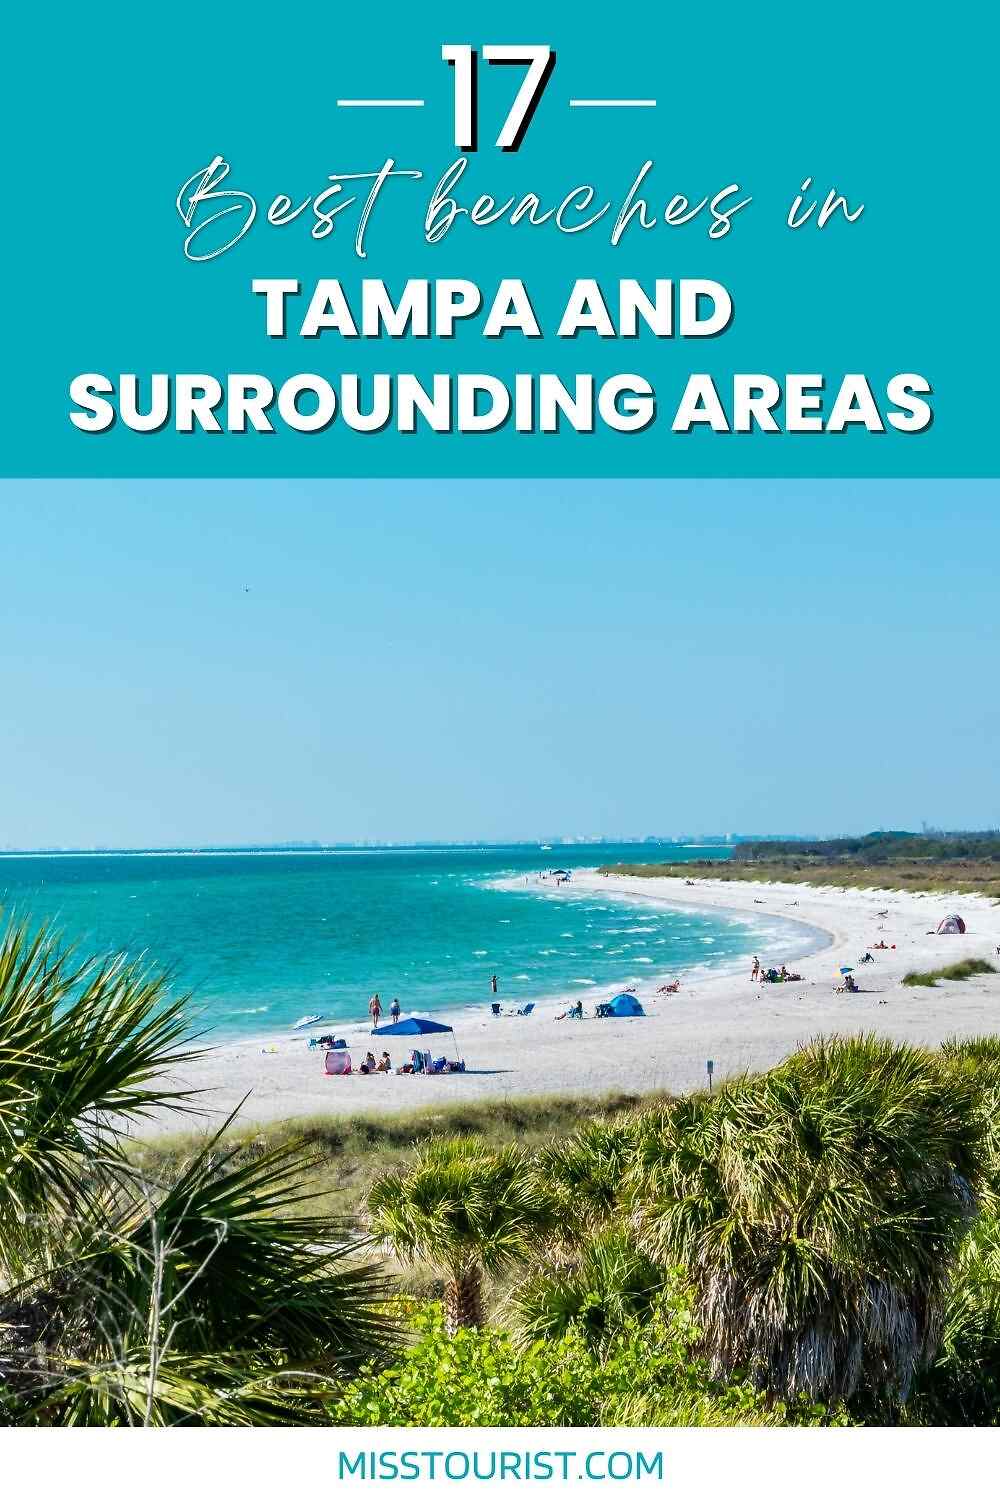 Best beaches in Tampa PIN 2